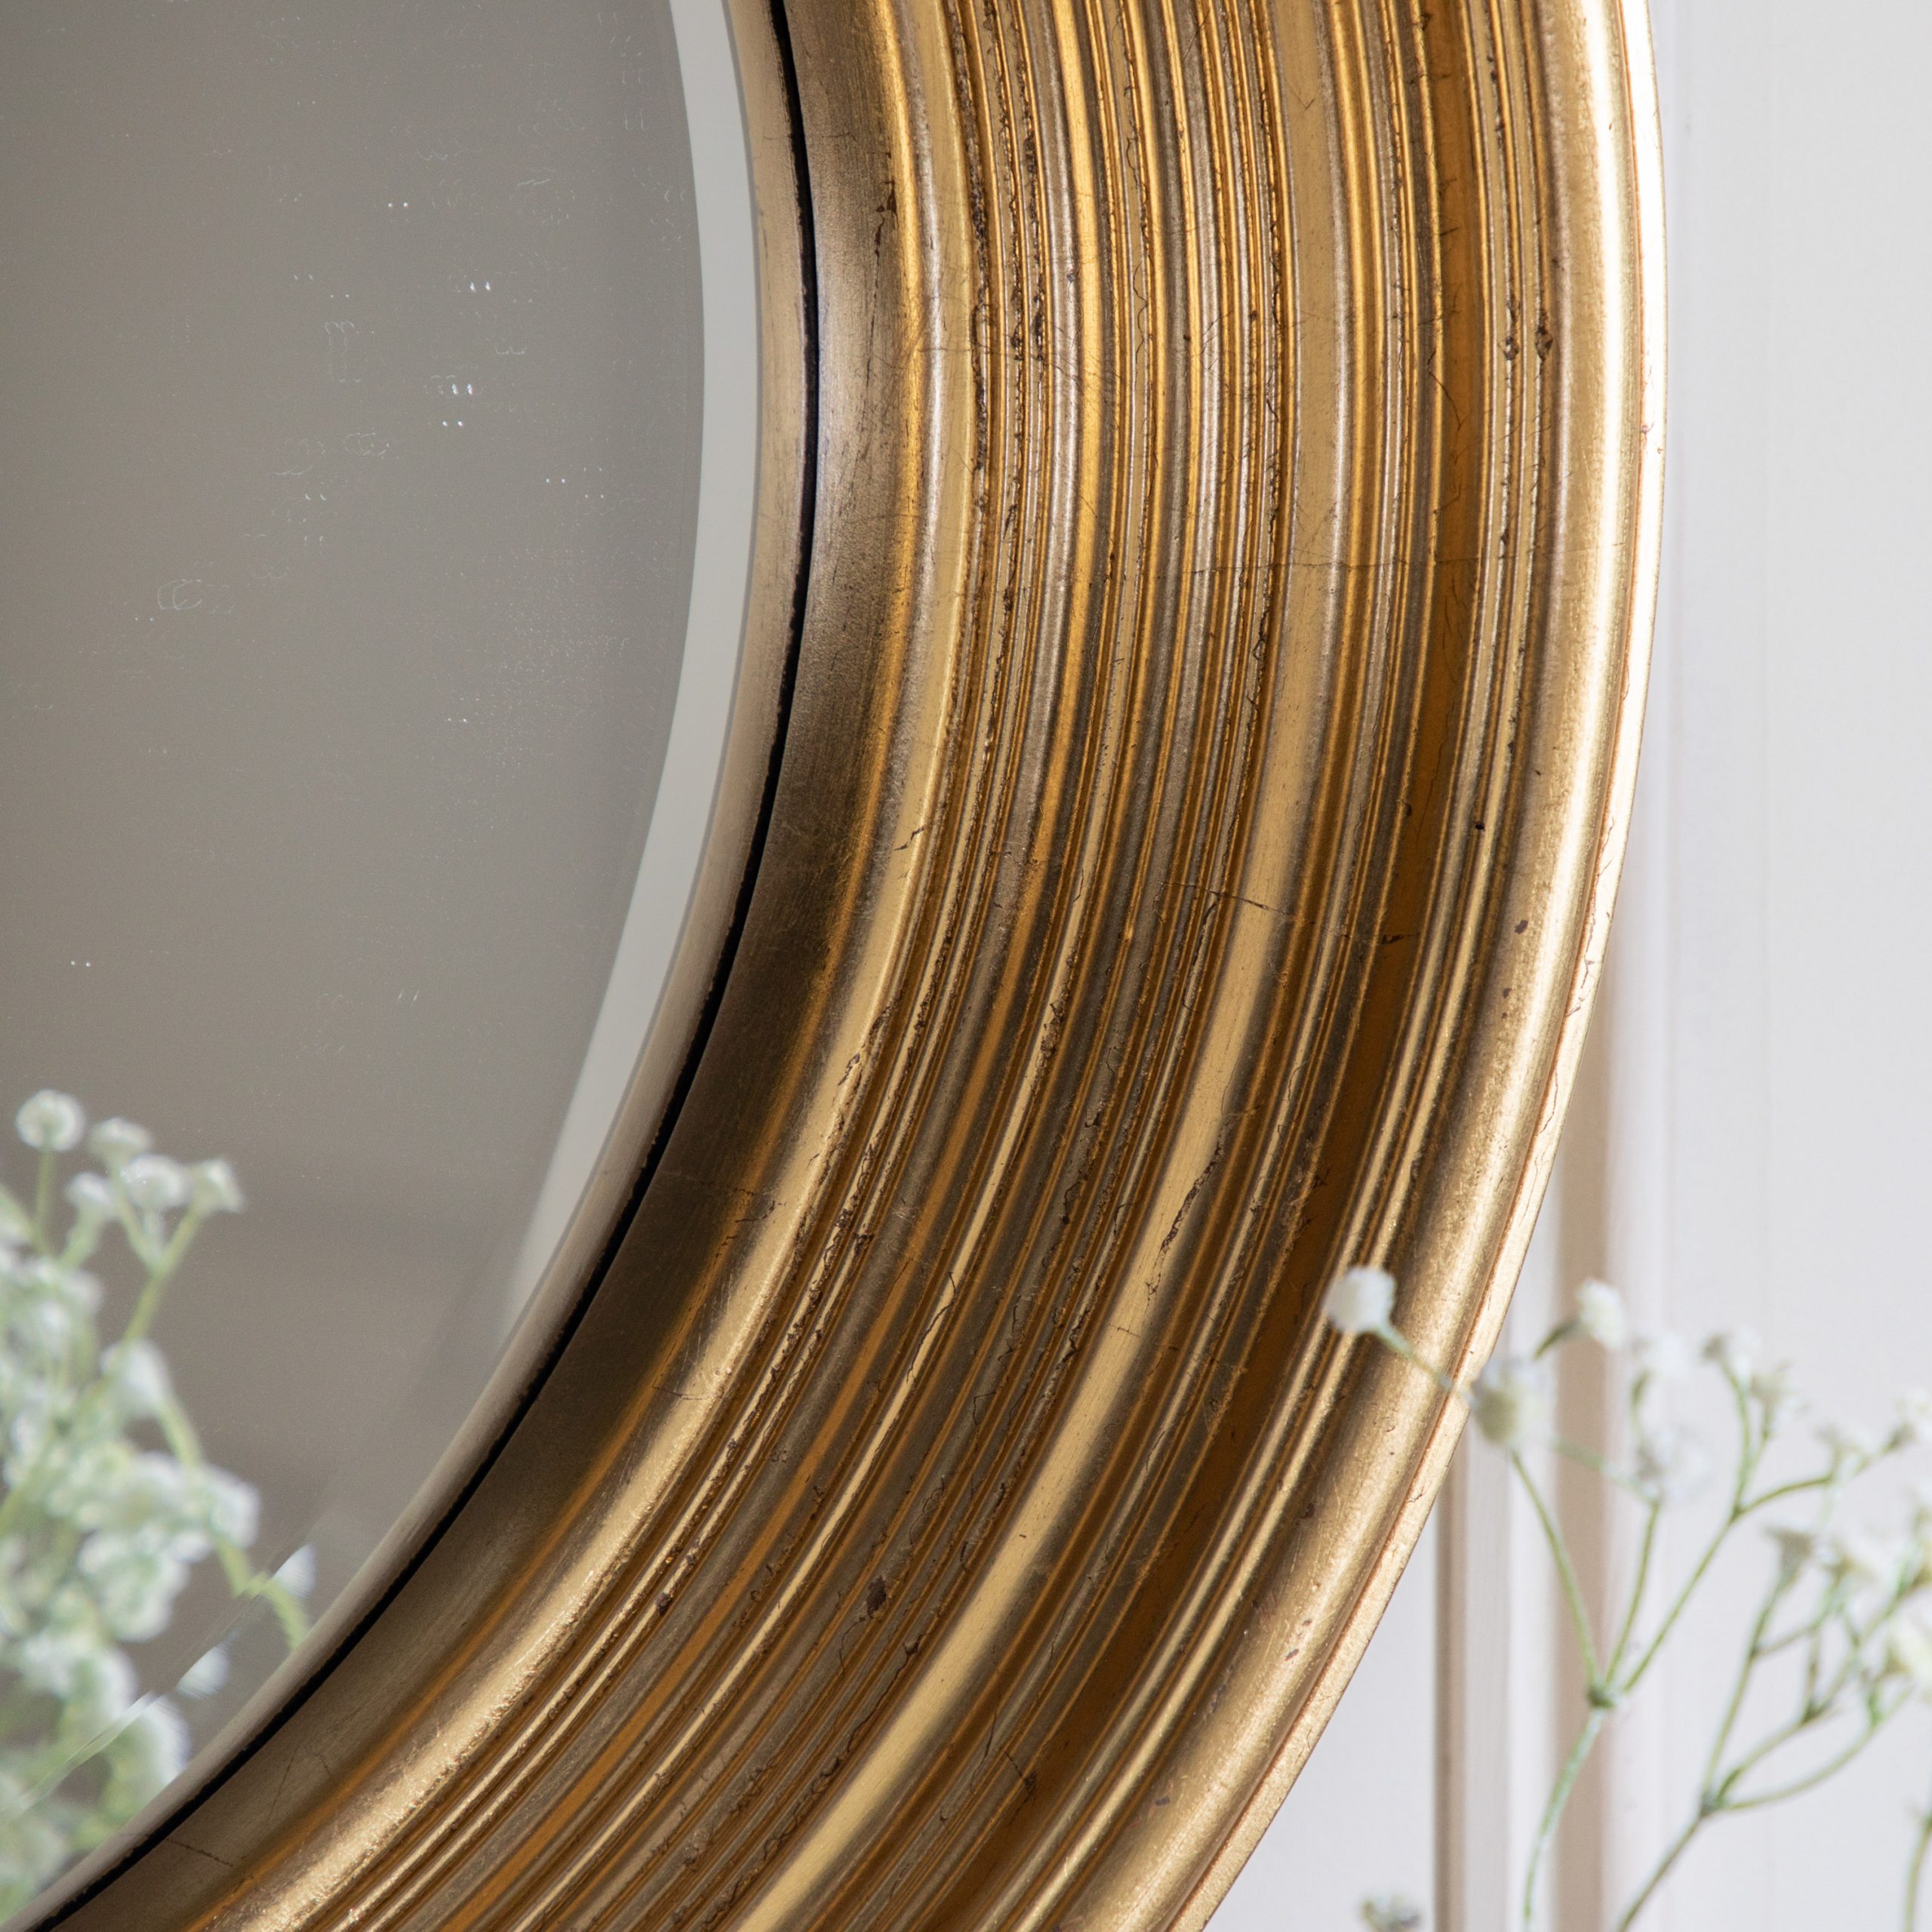 Gallery Direct Chaplin Round Mirror Gold | Shackletons